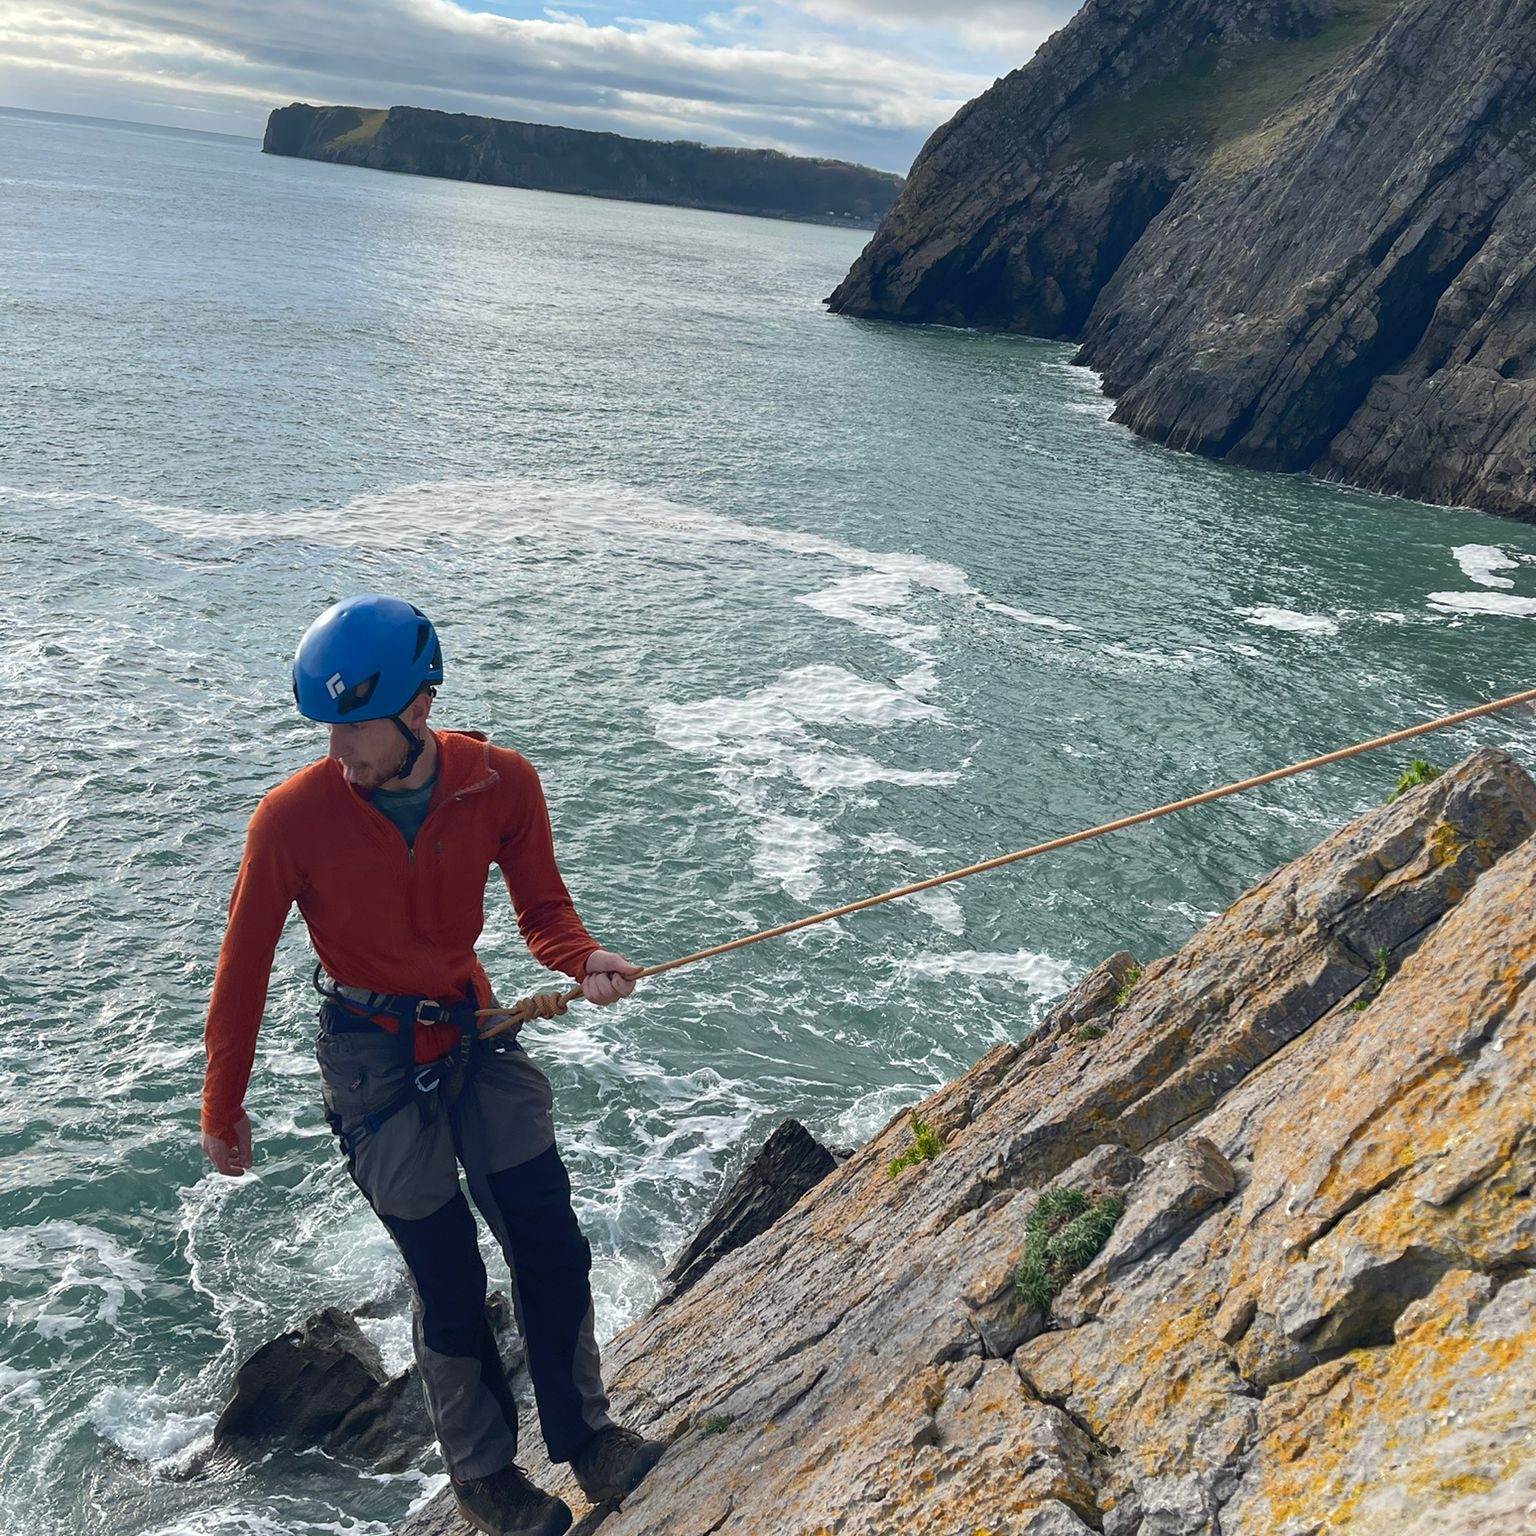 Pembrokeshire Coastal Adventure's instructor is abseiling at Newton Head.